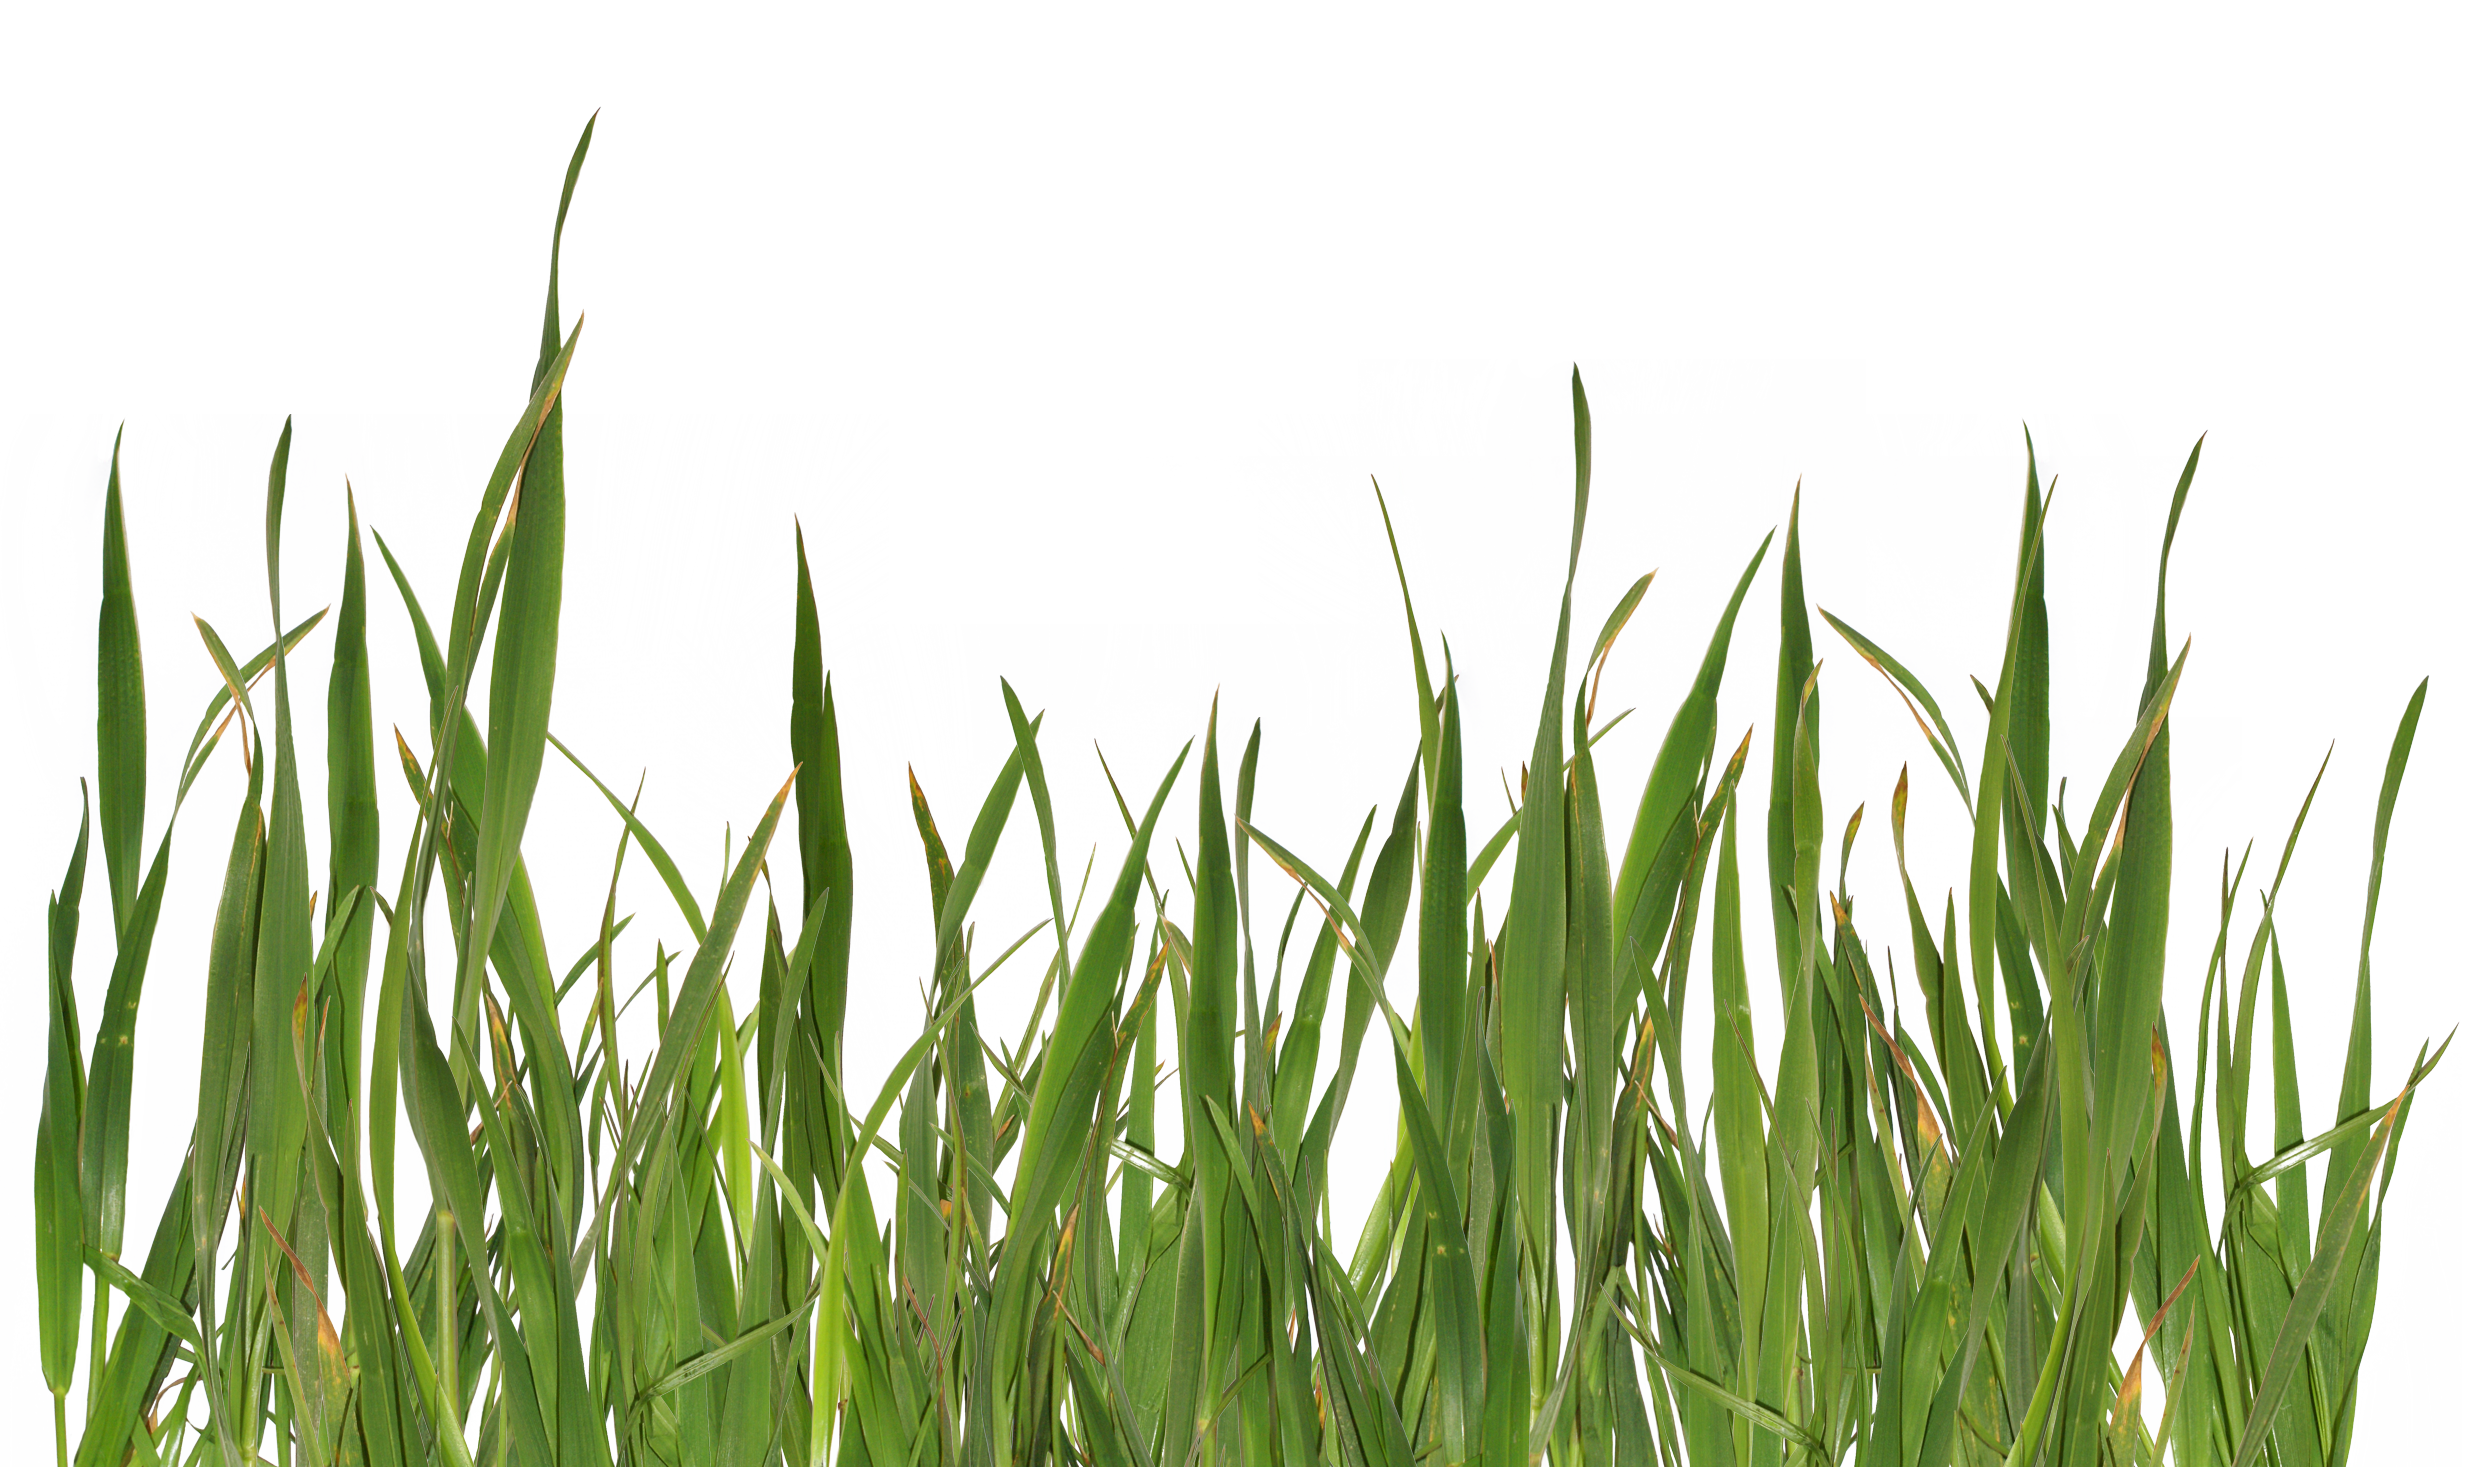 Grass PNG Image